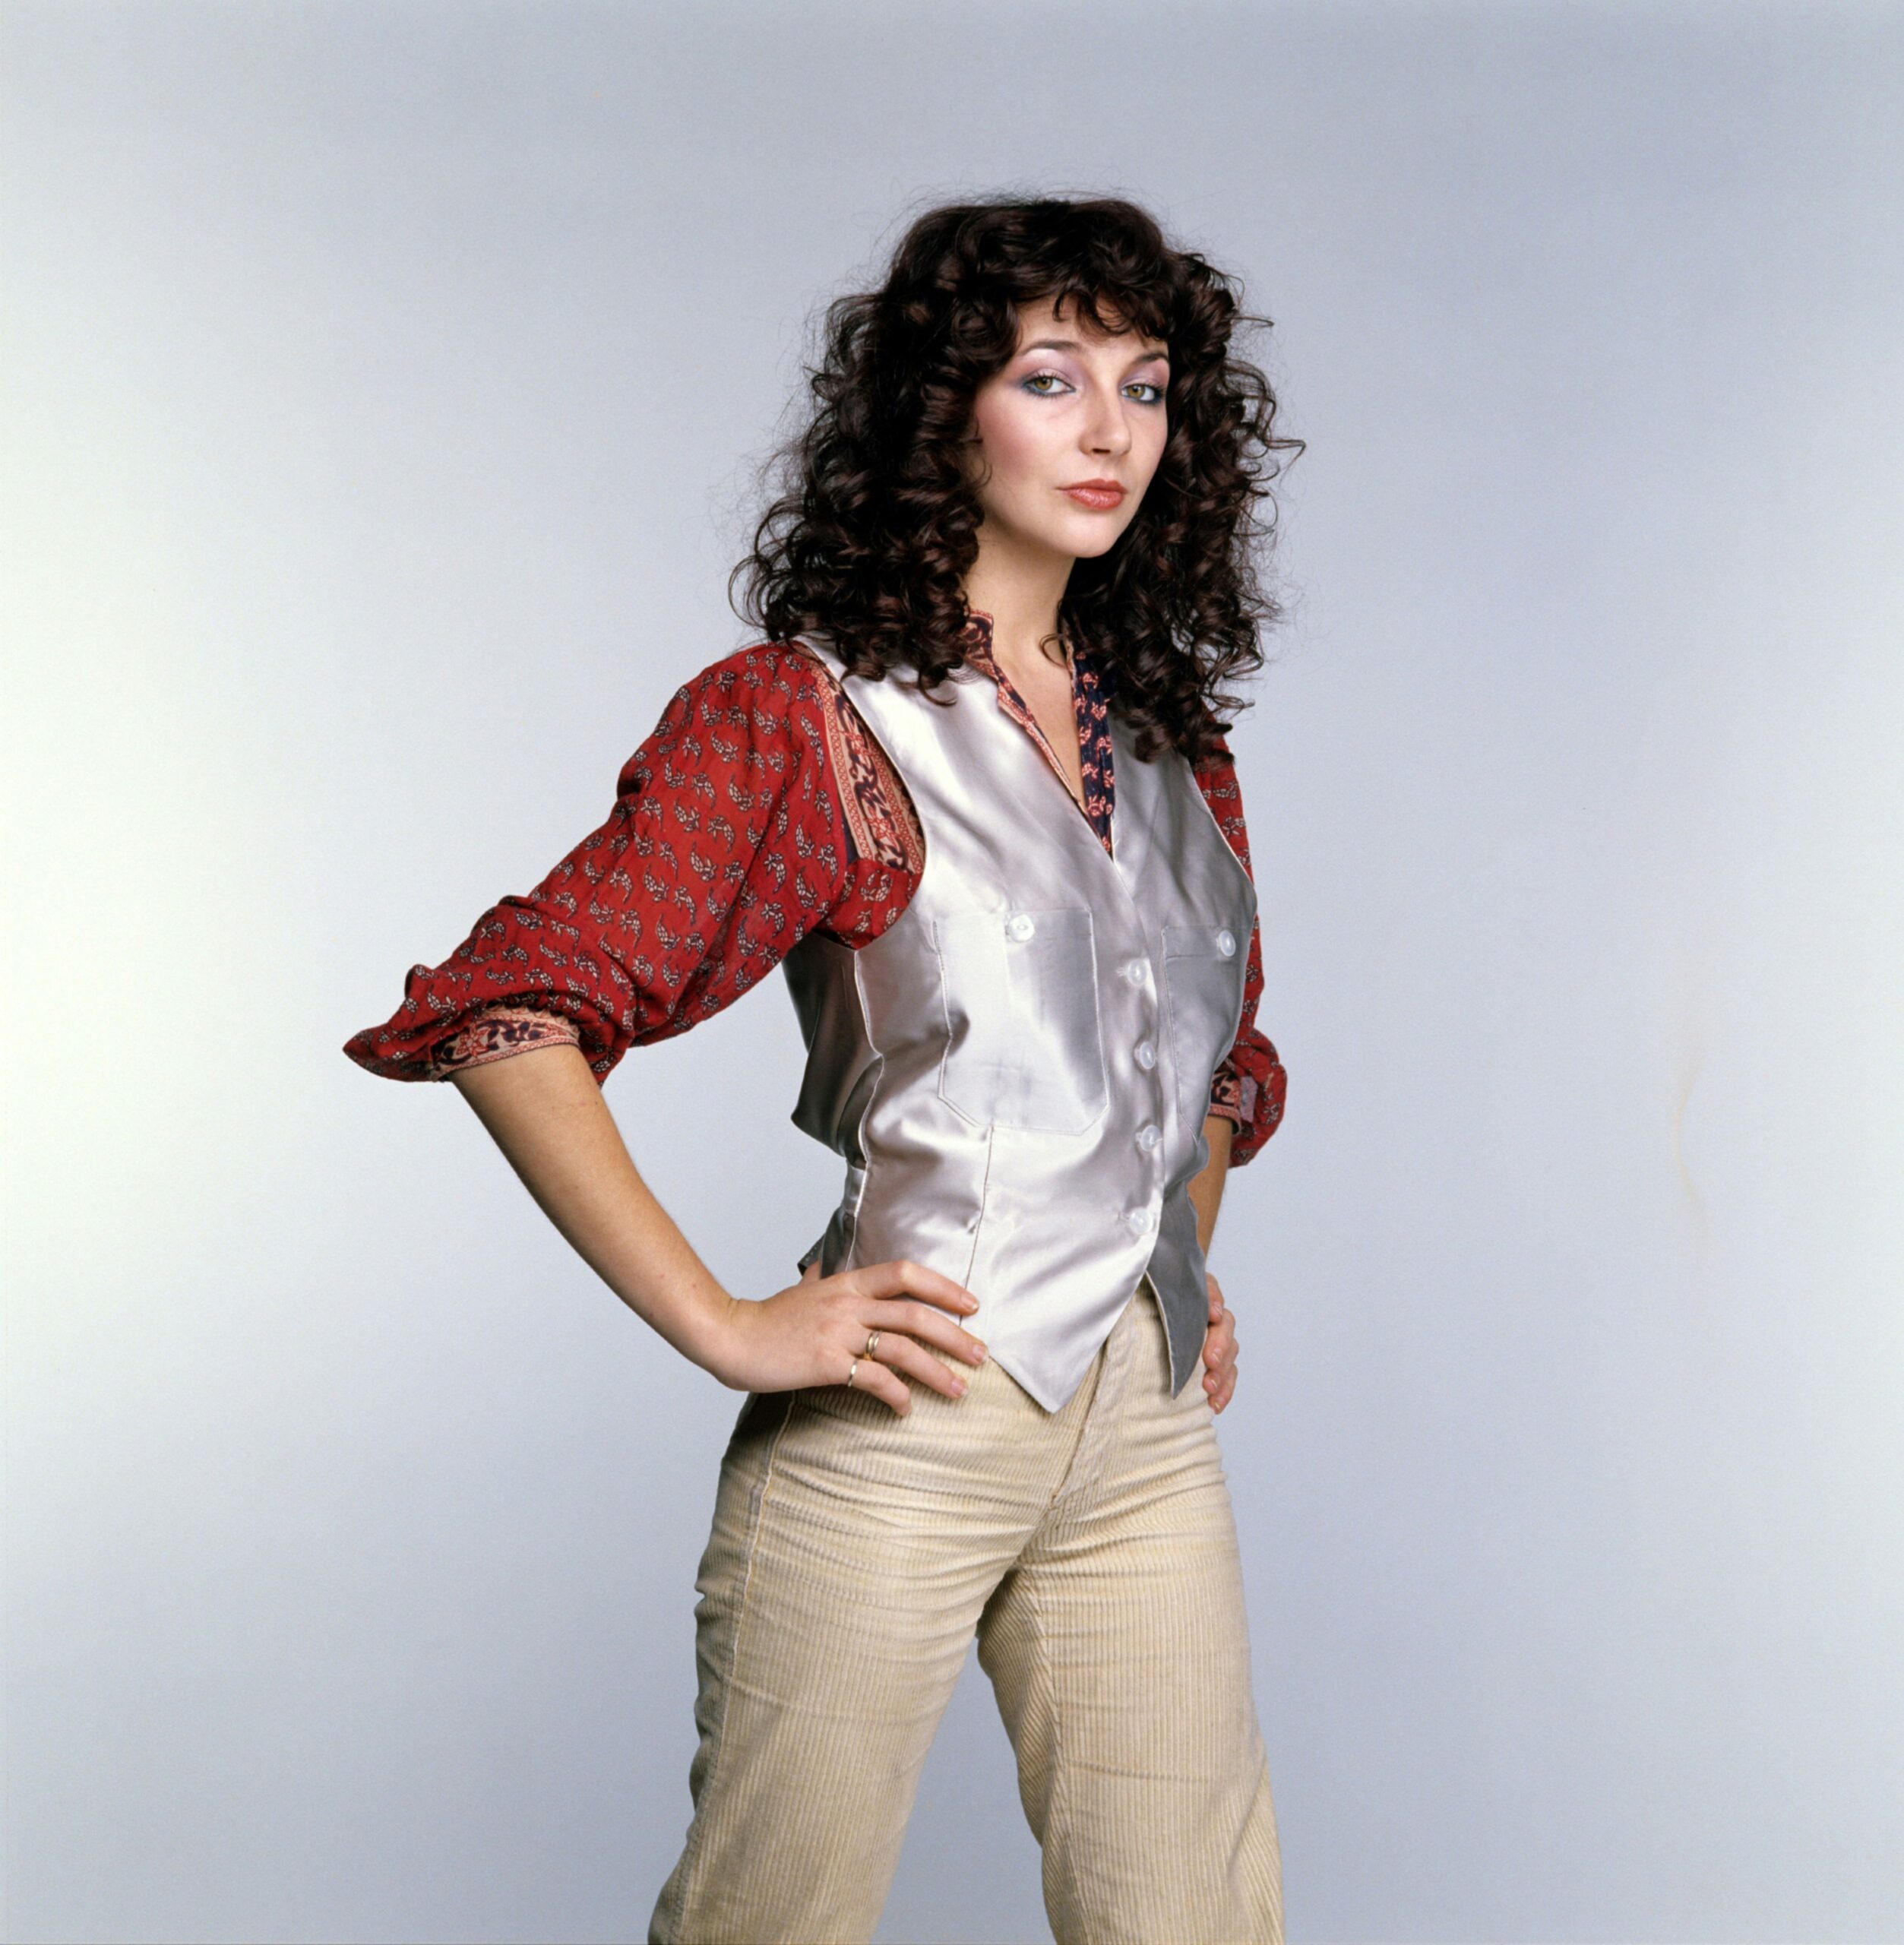 Kate Bush took the music world by storm in 1978.